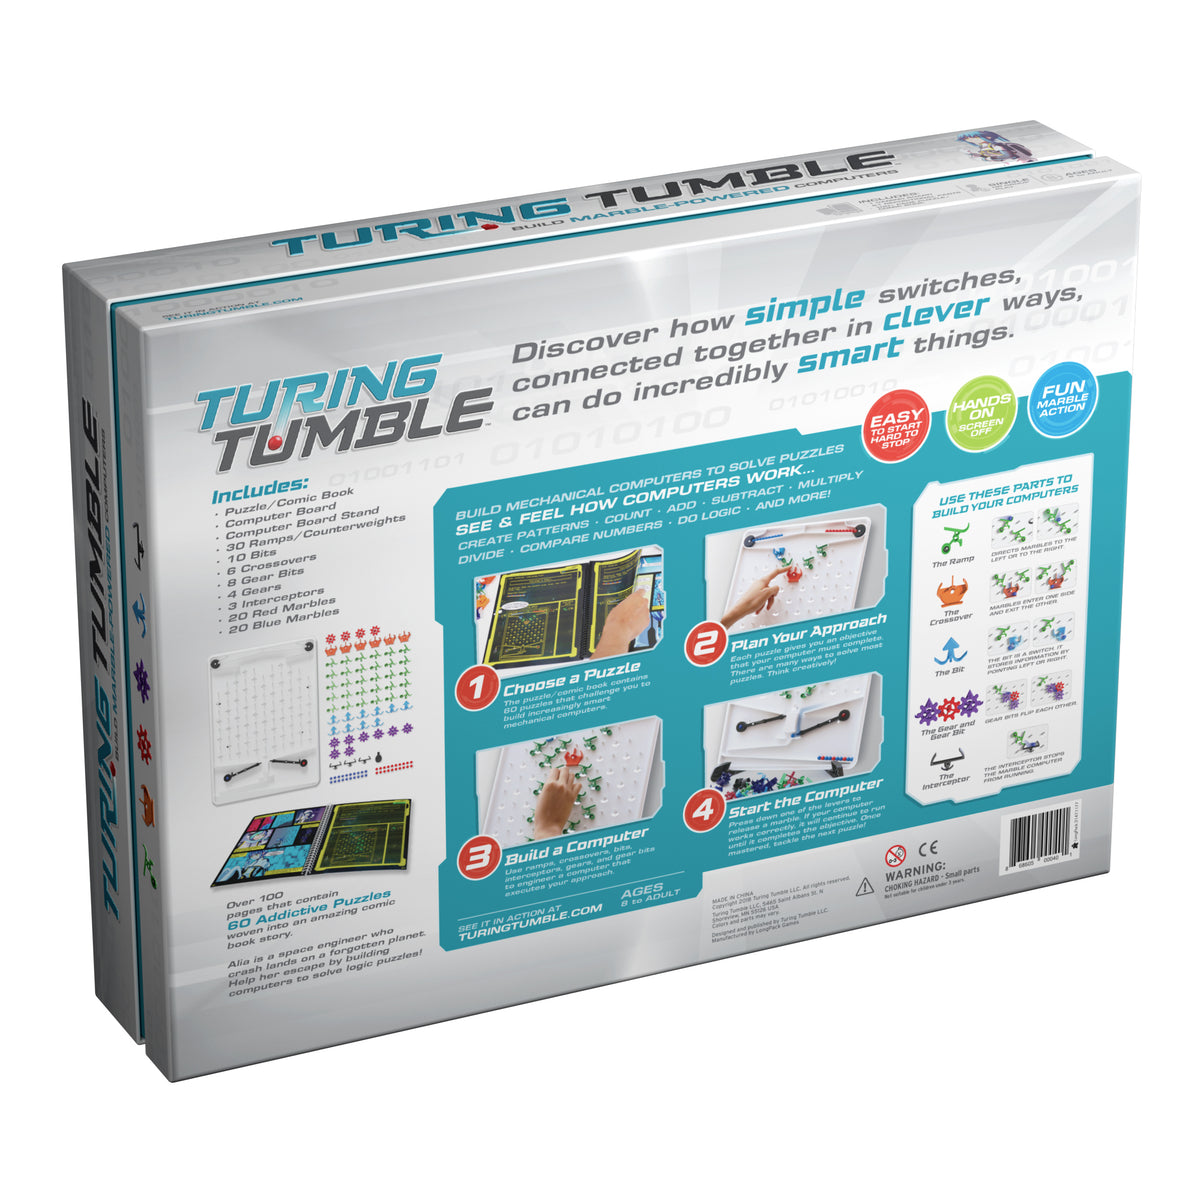 Turing Tumble: Build Marble-Powered Computers - National Museum Of